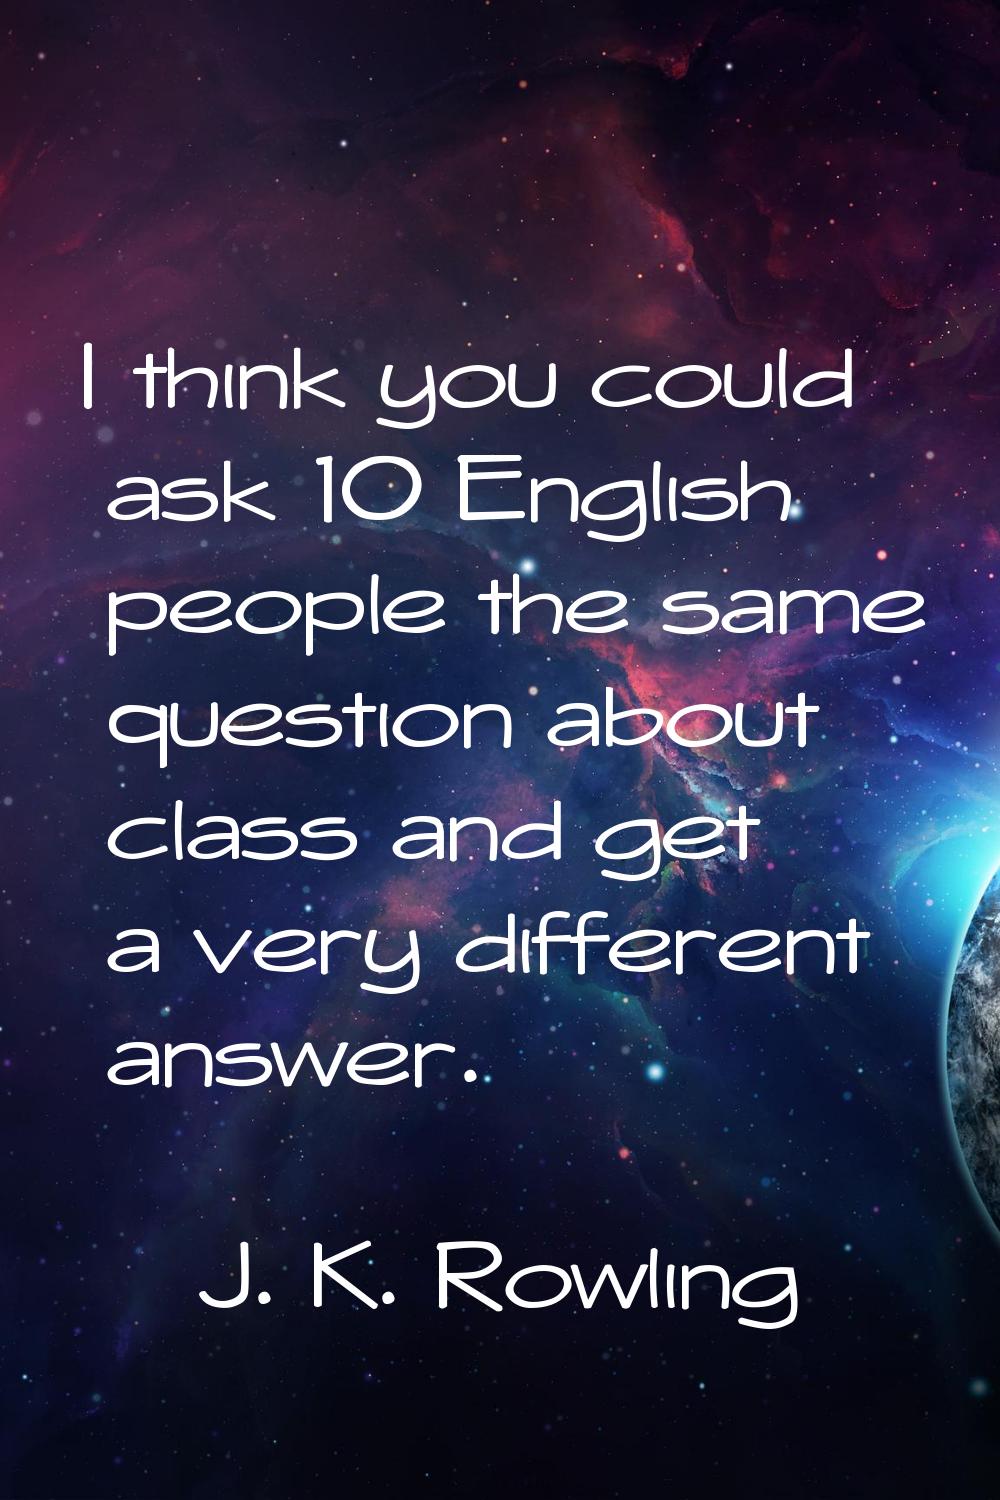 I think you could ask 10 English people the same question about class and get a very different answ